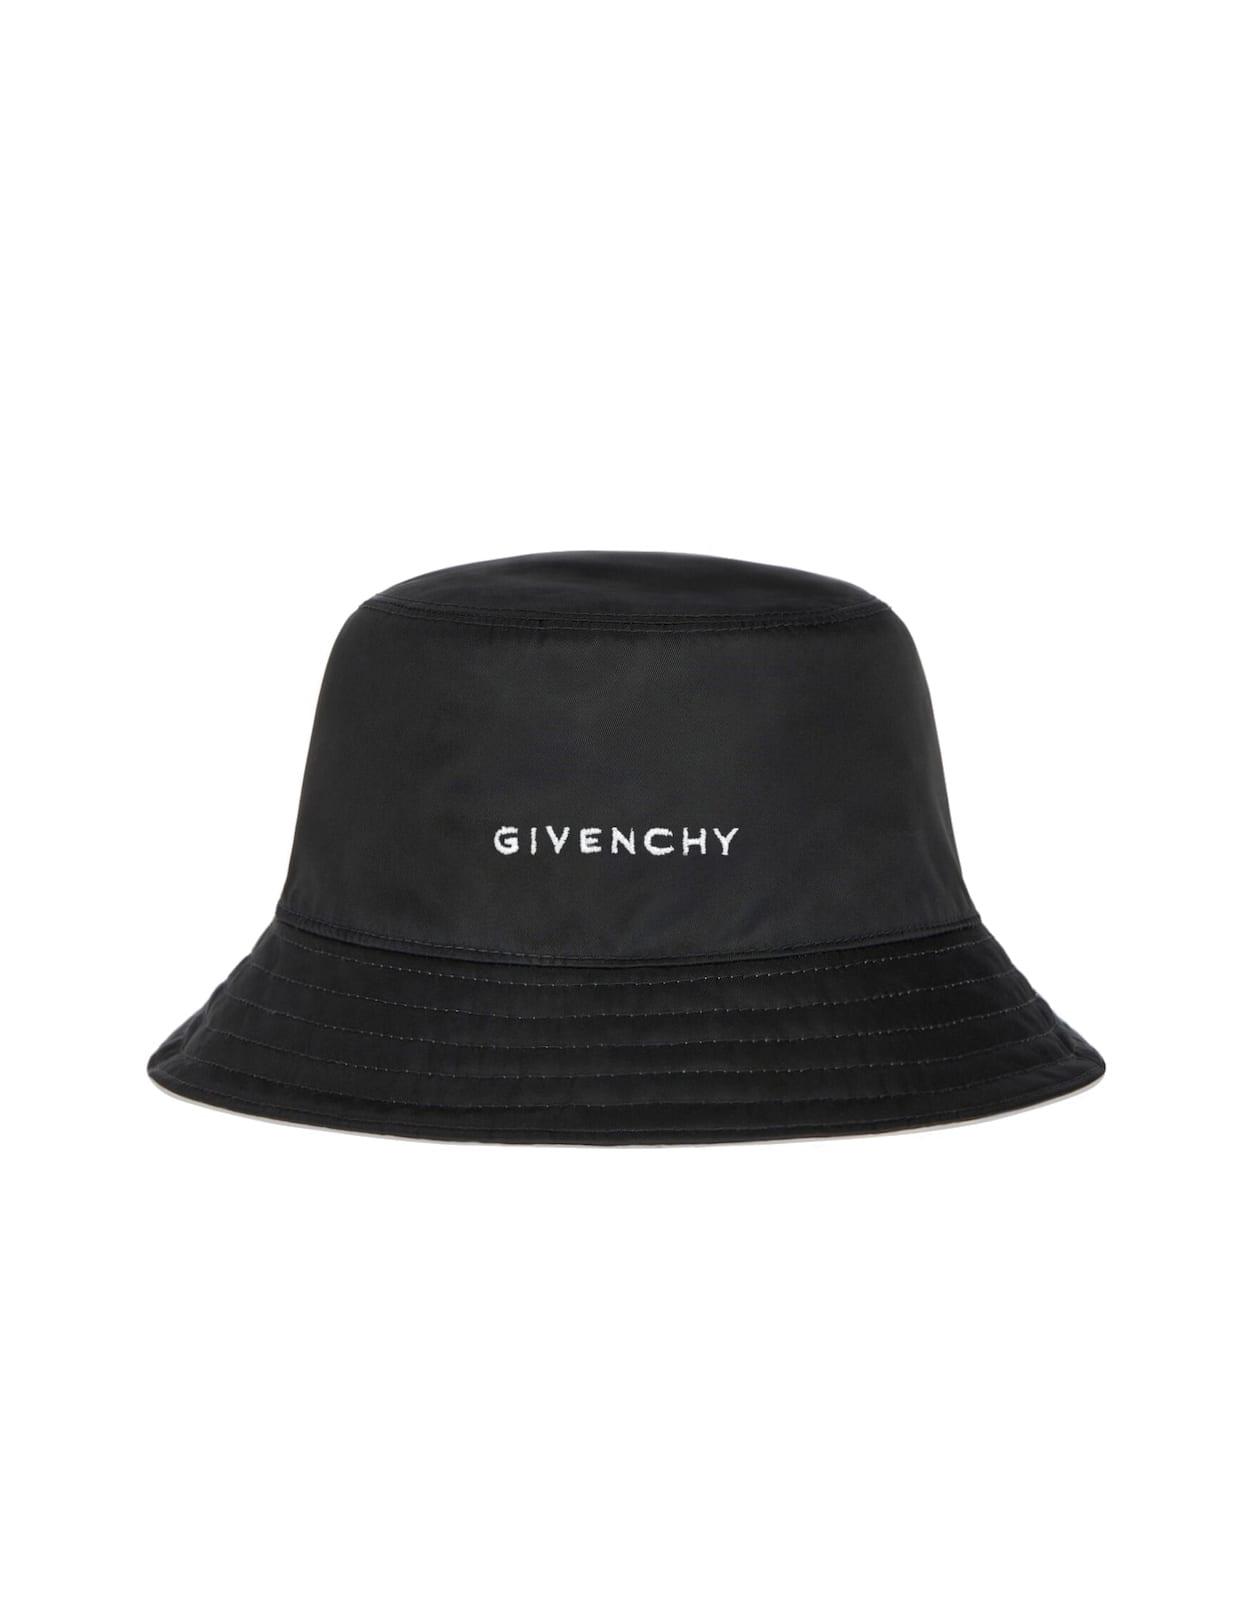 Givenchy Bucket Hat In Black Nylon With Logo for Men | Lyst